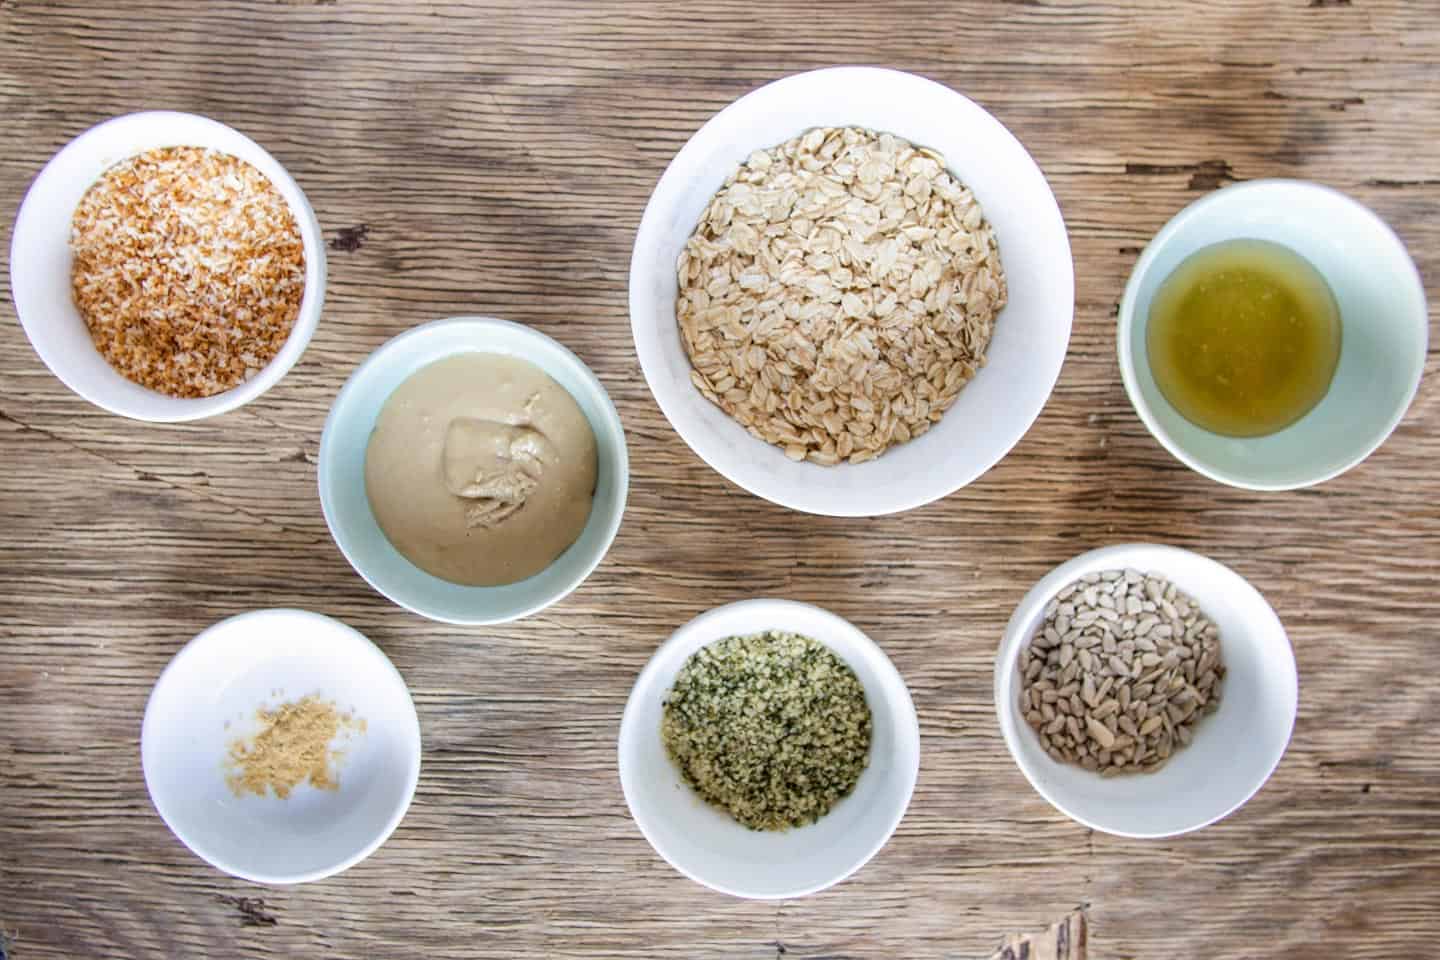 Ingredients in white bowls for no-bake energy balls